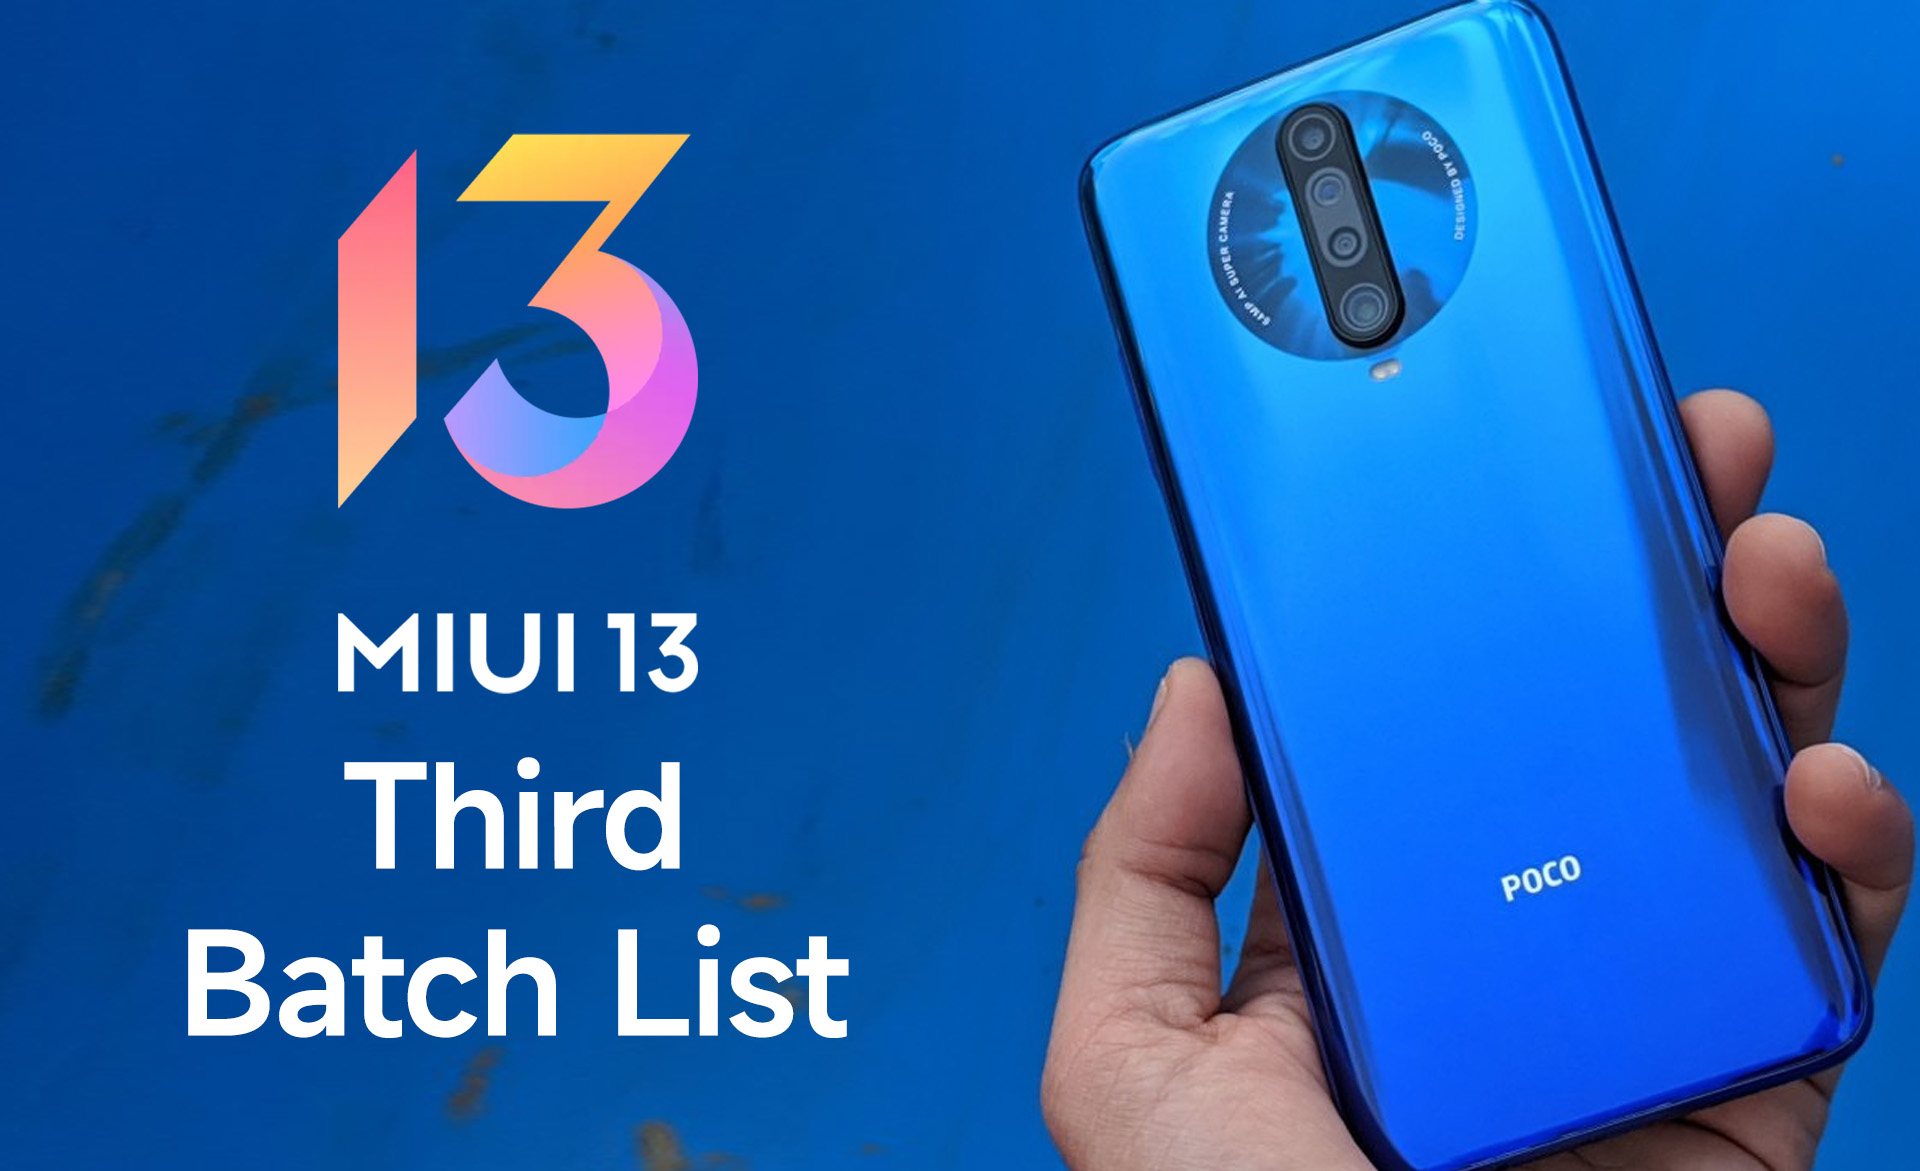 MIUI 13 Third Batch List These Xiaomi devices will get MIUI 13 in Q2